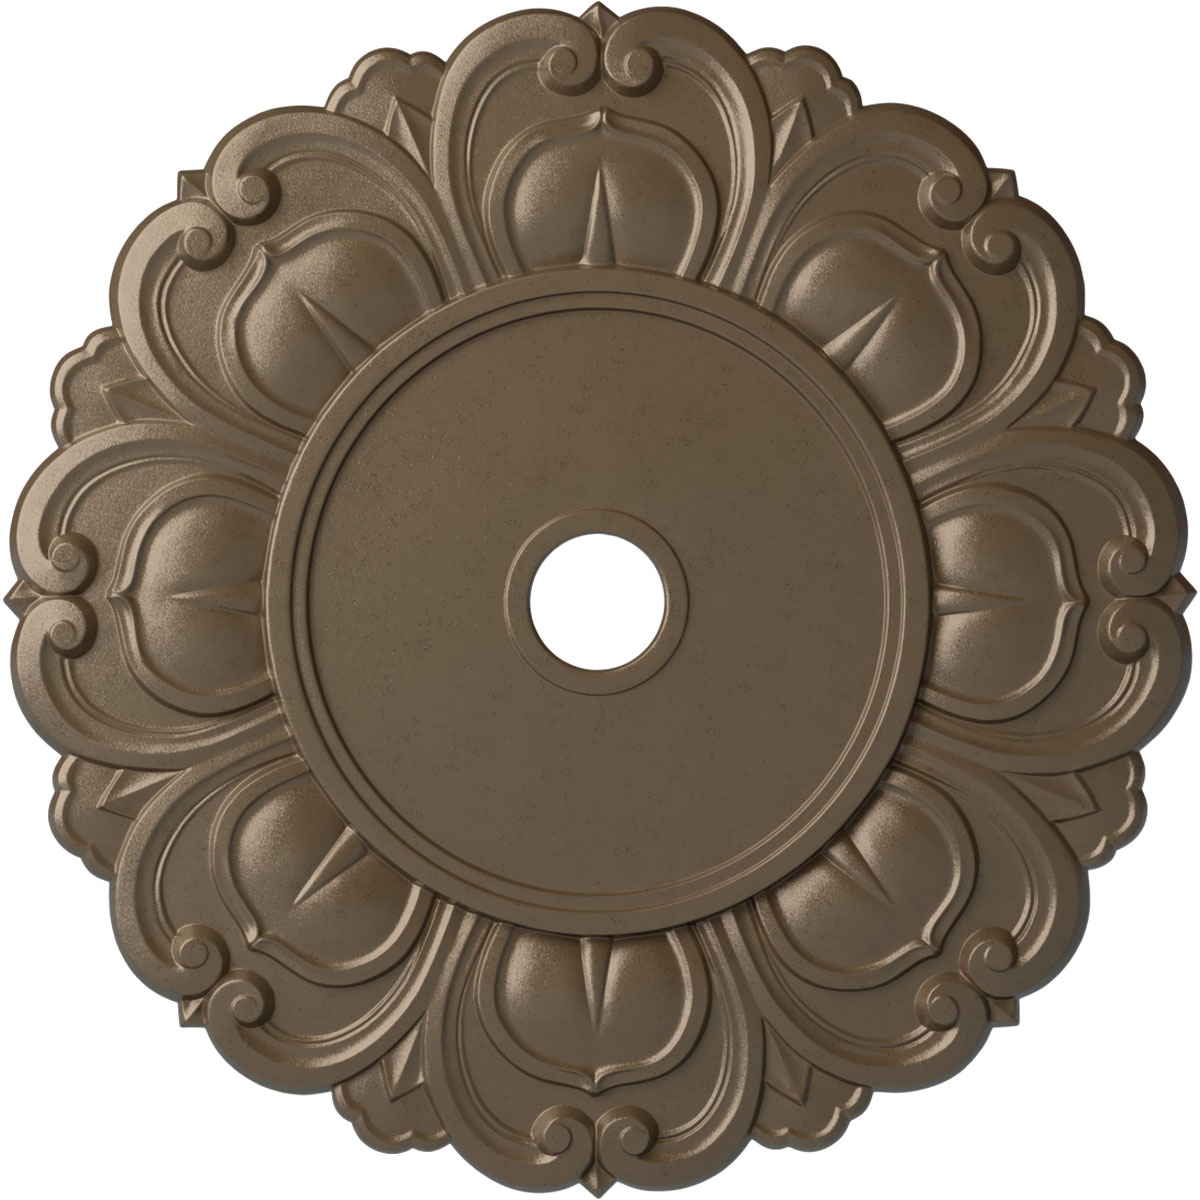 32 1/4"OD x 3 5/8"ID x 1 1/8"P Angel Ceiling Medallion (Fits Canopies up to 15 3/4"), Hand-Painted Warm Silver - image 1 of 5